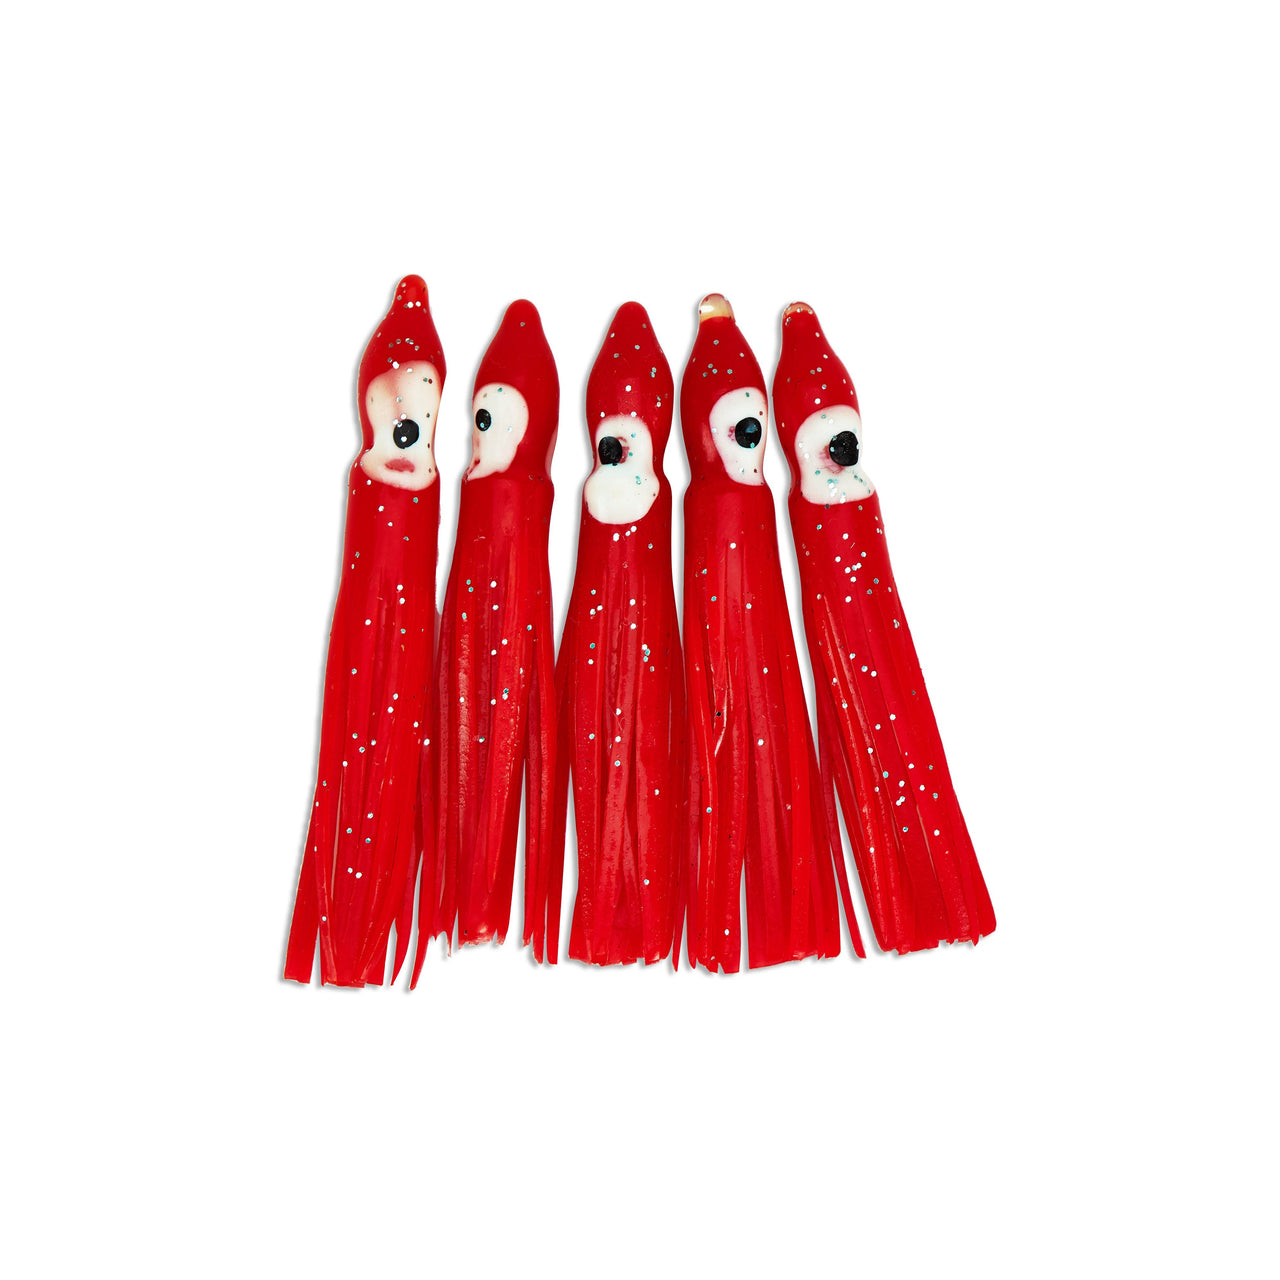 "Flame Sparkle" Hoochie Squid Skirts (5x PACK) 3.5"